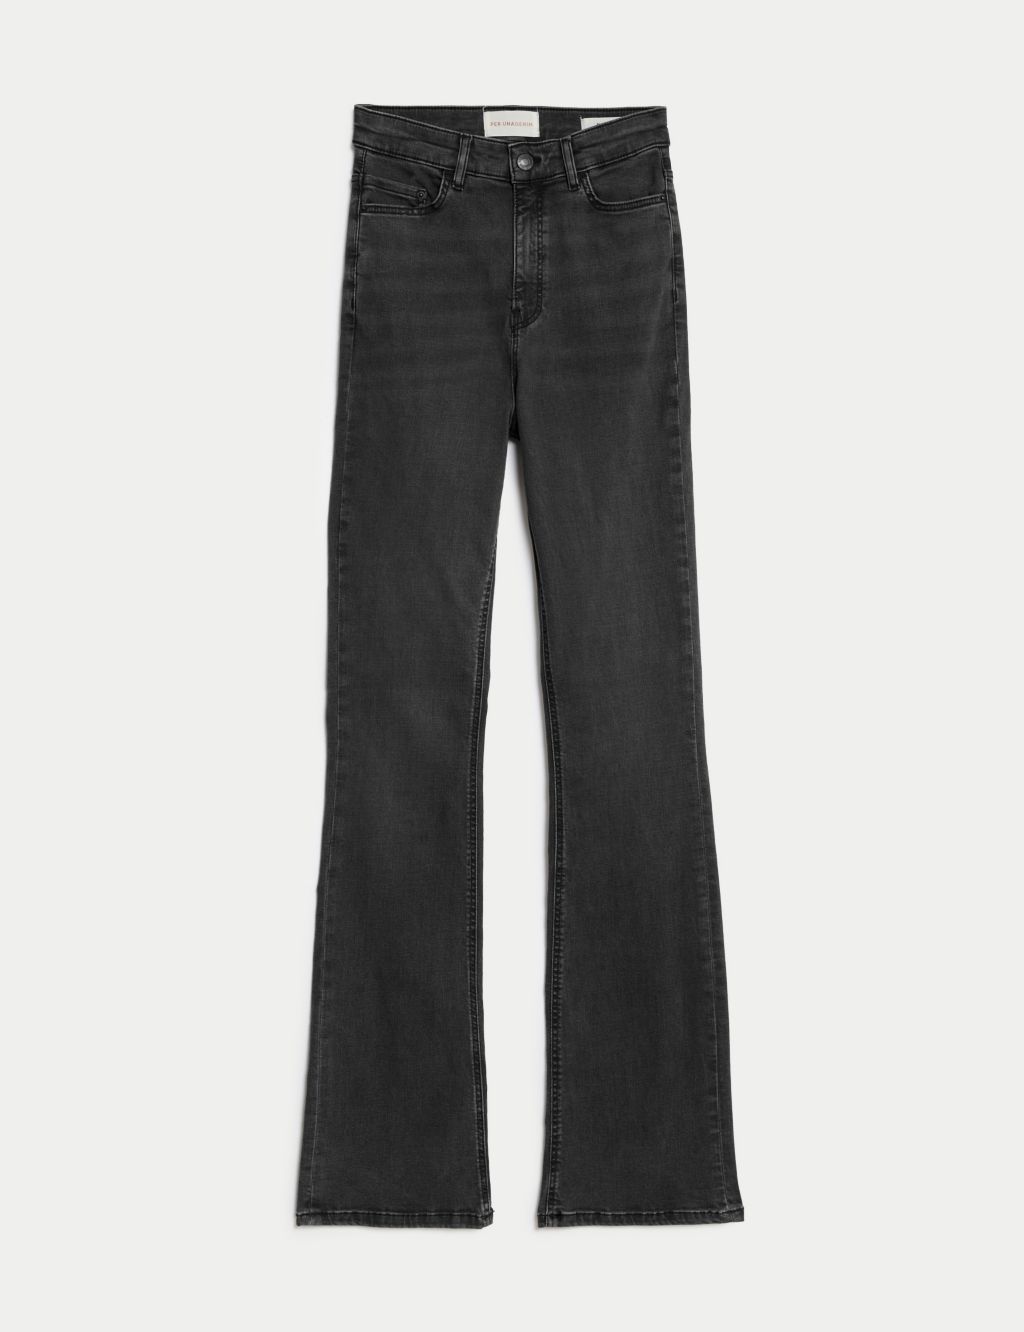 Lyocell Rich High Waisted Slim Flare Jeans image 1